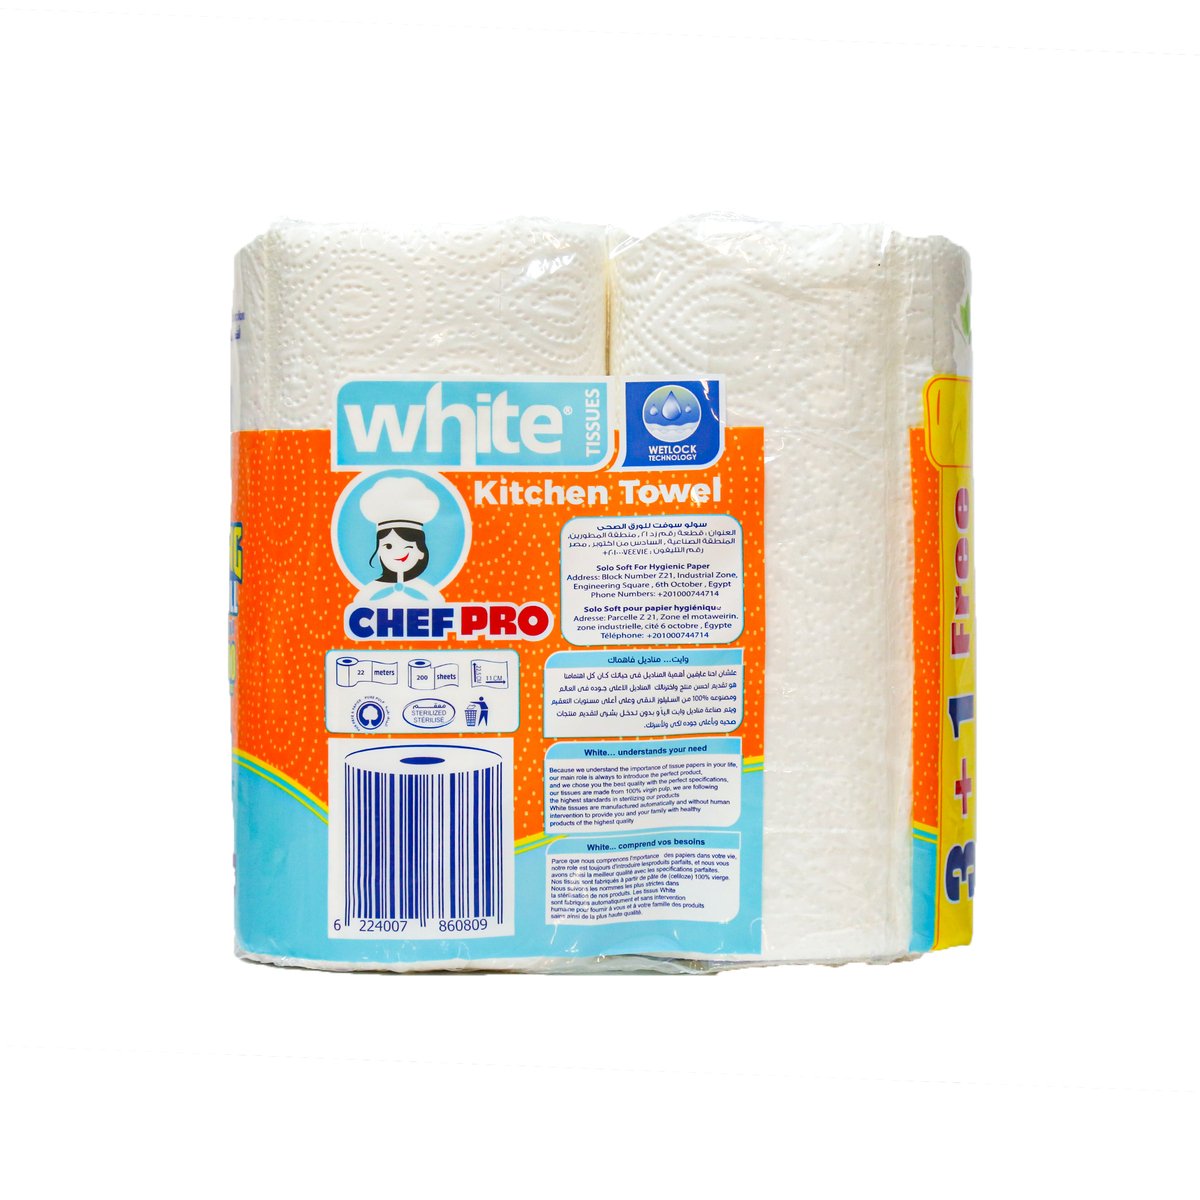 White Chef Pro King Roll Compressed Kitchen Towel 3ply 4 x 200 Sheets